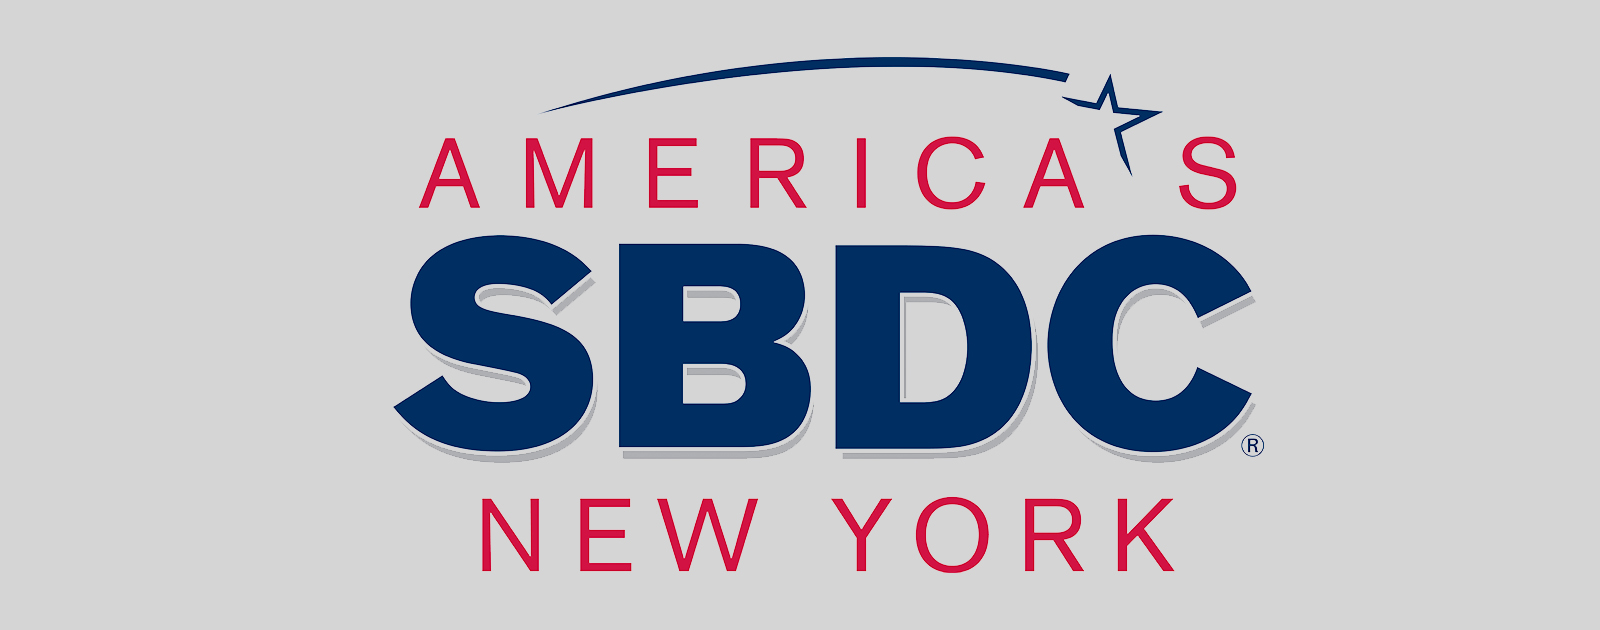 SBDC Hosts Free Webinar To Assist With Video Marketing